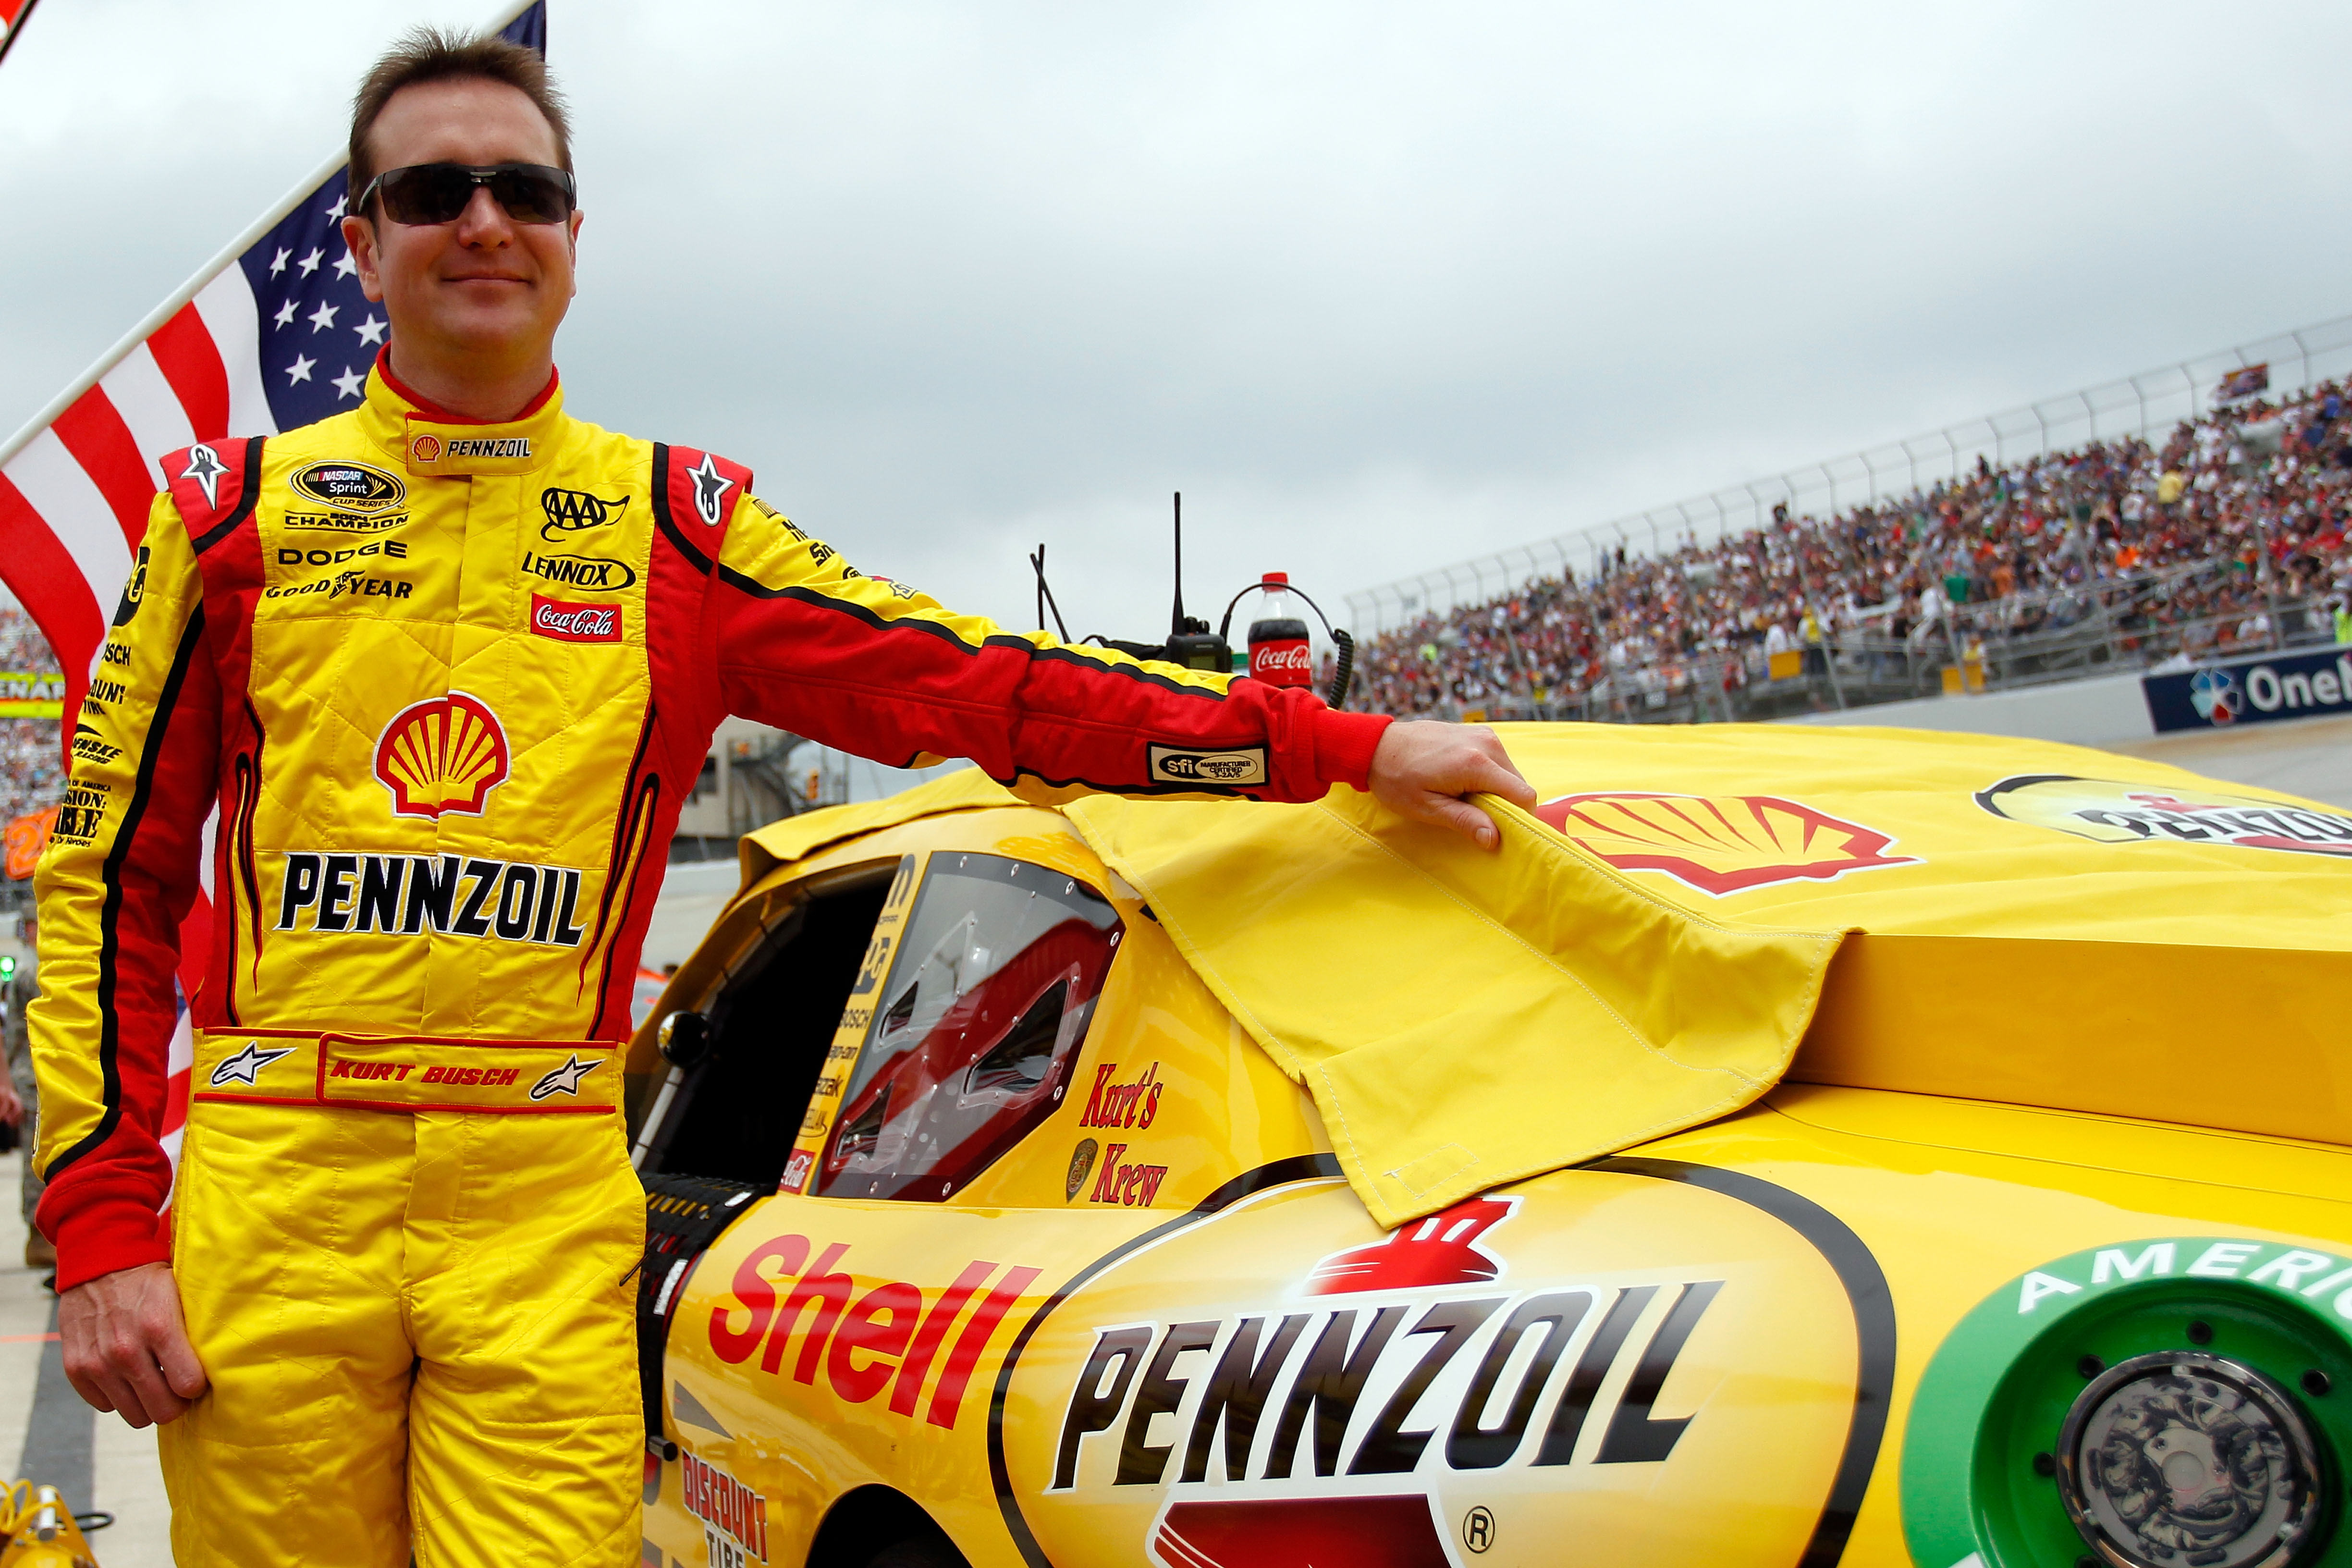 DOVER, DE - MAY 15:  Kurt Busch, driver of the #22 Shell/Pennzoil Dodge, stands next to his car on the grid prior the NASCAR Sprint Cup Series FedEx 400 Benefiting Autism Speaks at Dover International Speedway on May 15, 2011 in Dover, Delaware.  (Photo b